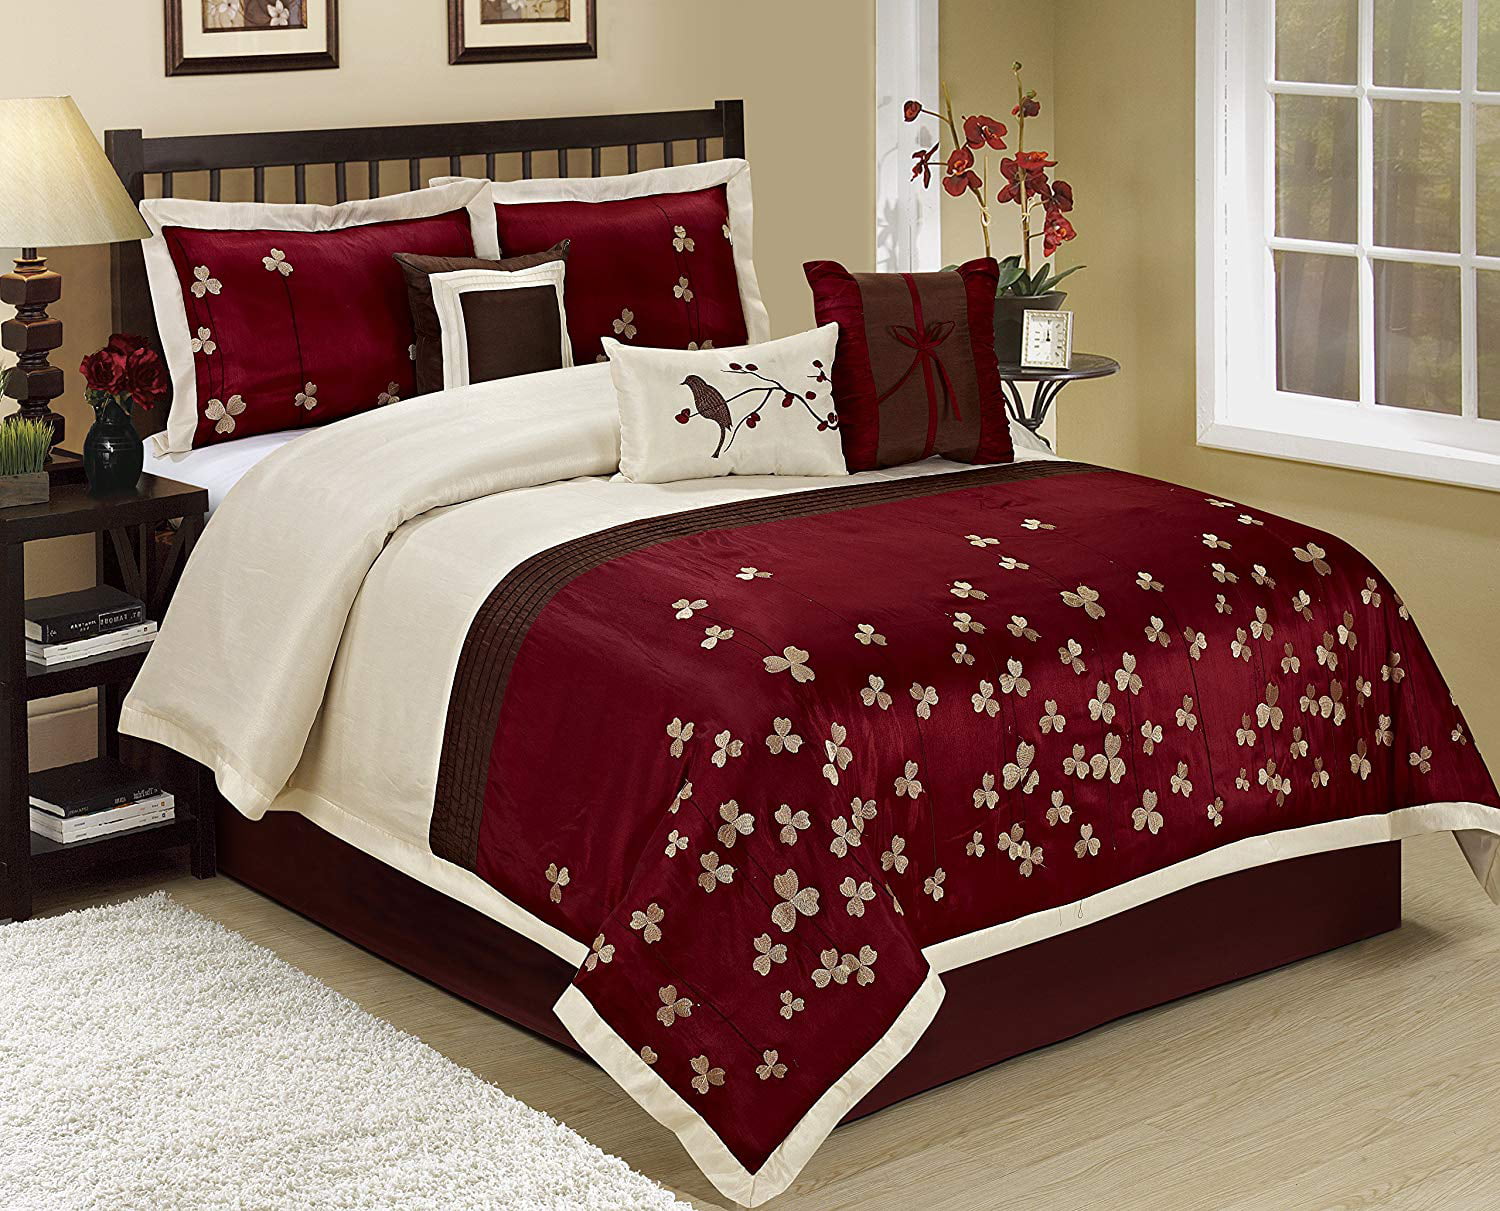 3 COLORS BED IN A BAG Cal King Queen 7 PIECE COMFORTER SET King 